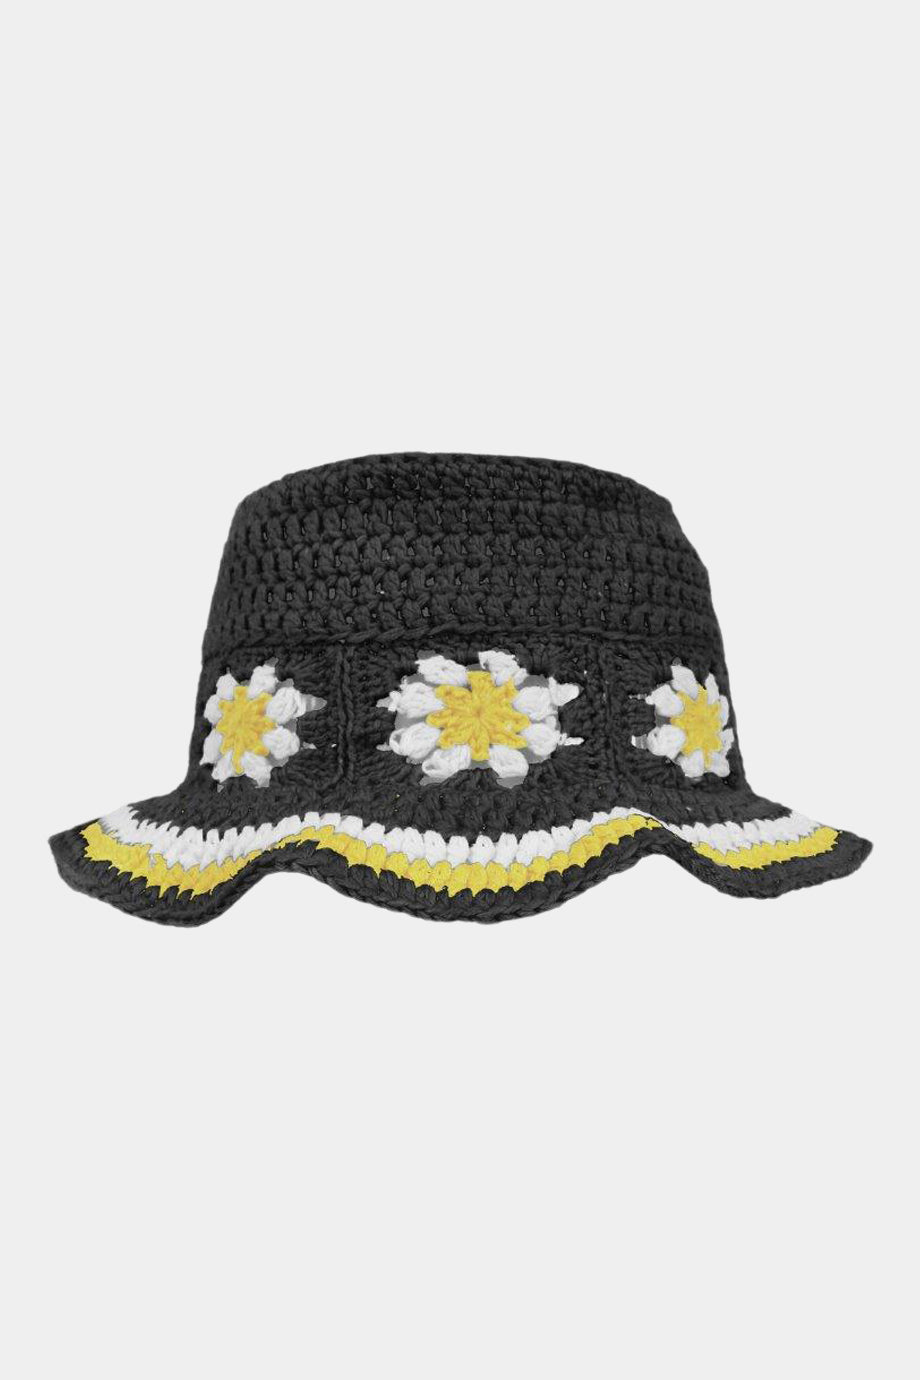 Crocheted hat with flowers